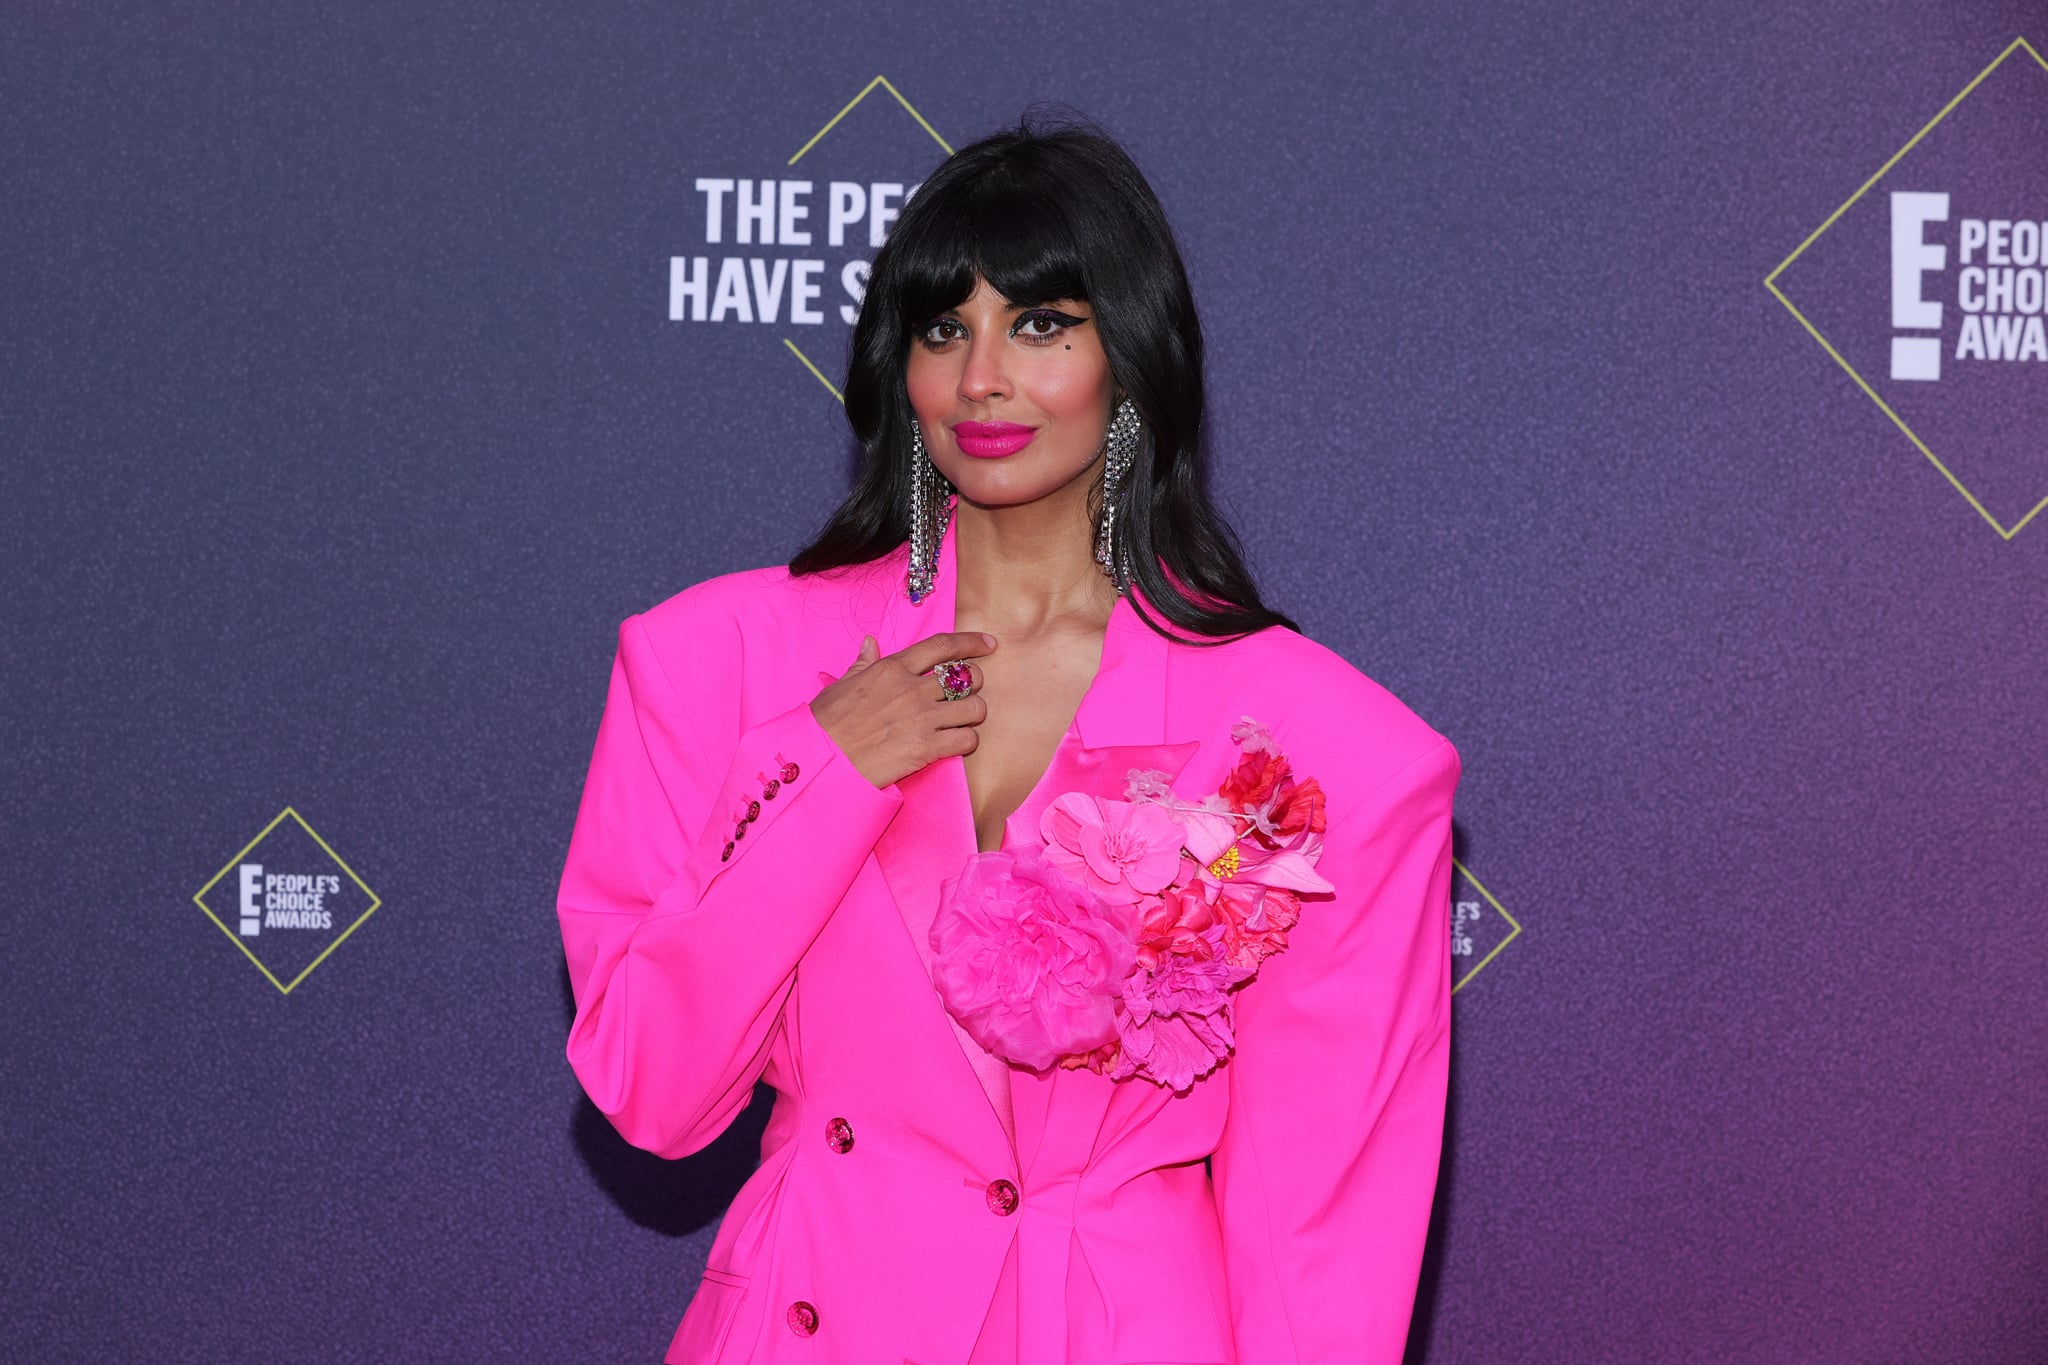 SANTA MONICA, CALIFORNIA - NOVEMBER 15: 2020 E! PEOPLE'S CHOICE AWARDS -- In this image released on November 15, Jameela Jamil arrives at the 2020 E! People's Choice Awards held at the Barker Hangar in Santa Monica, California and on broadcast on Sunday, November 15, 2020. (Photo by Rich Polk/E! Entertainment/NBCU Photo Bank via Getty Images)